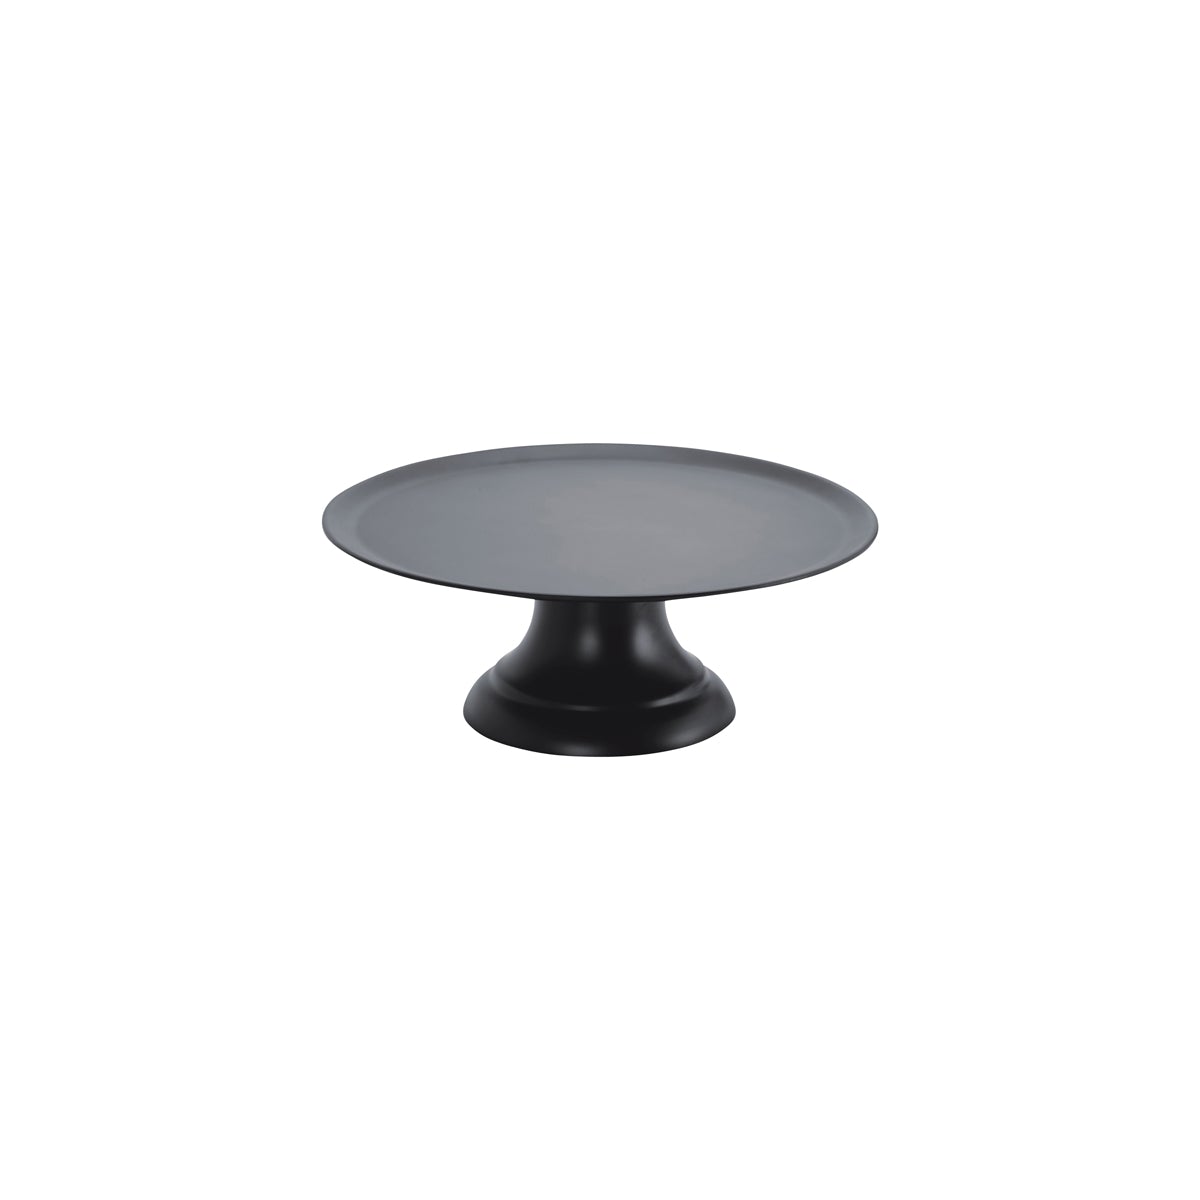 '04148 Chef Inox Cake Plate with Stand Black Polycarbonate 239x107mm Tomkin Australia Hospitality Supplies